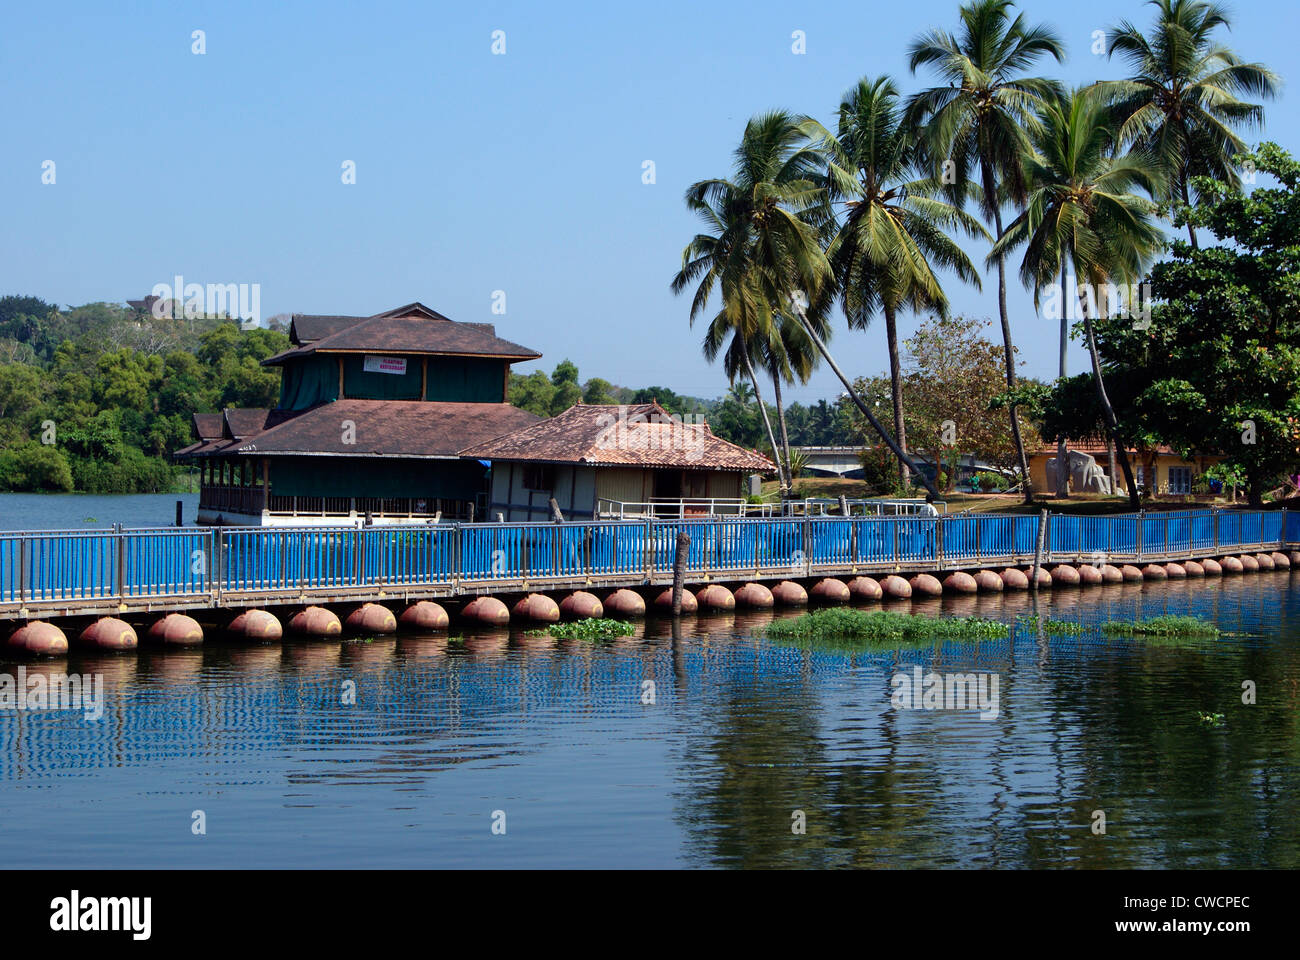 Floating Bridge and Floating restaurant on Kerala backwaters surrounded by coconut palm Landscapes at Veli Trivandrum India Stock Photo